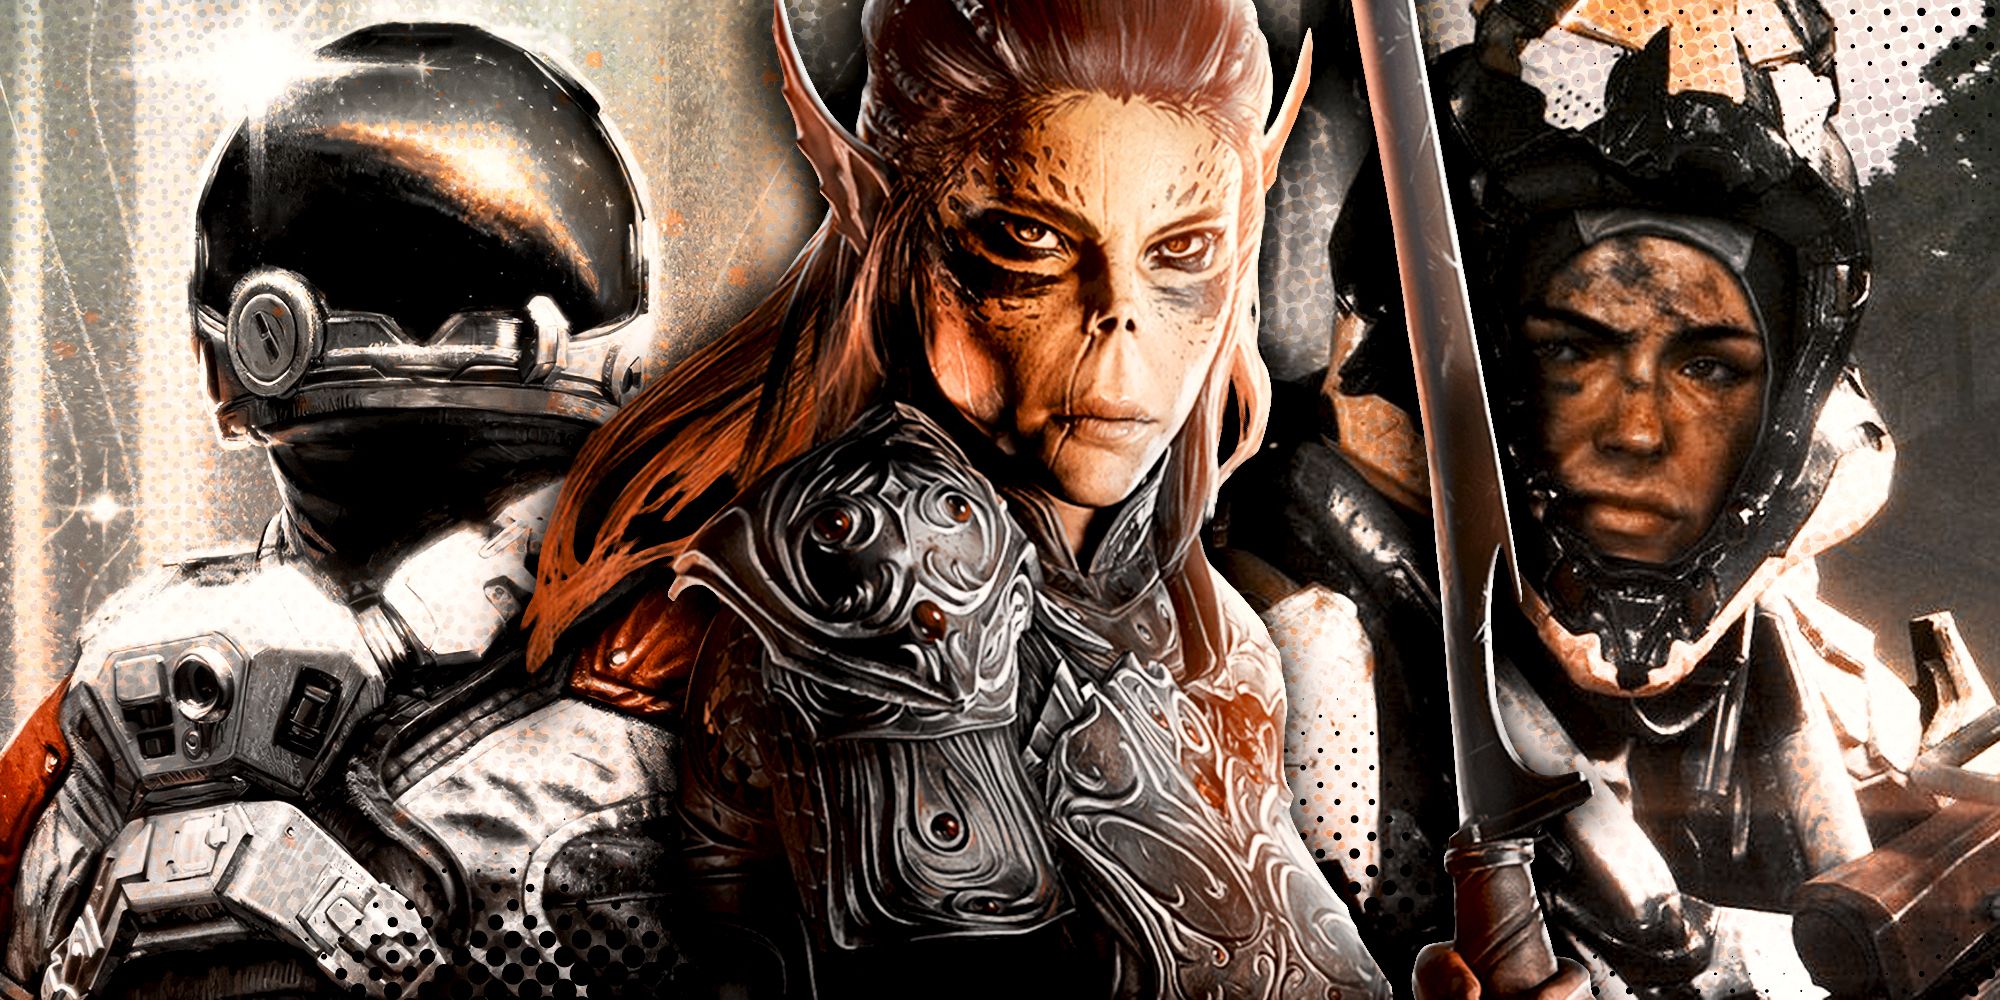 Lae'zel from Baldur's Gate 3 in the center of a split image with characters from Starfield and Anthem on the sides.